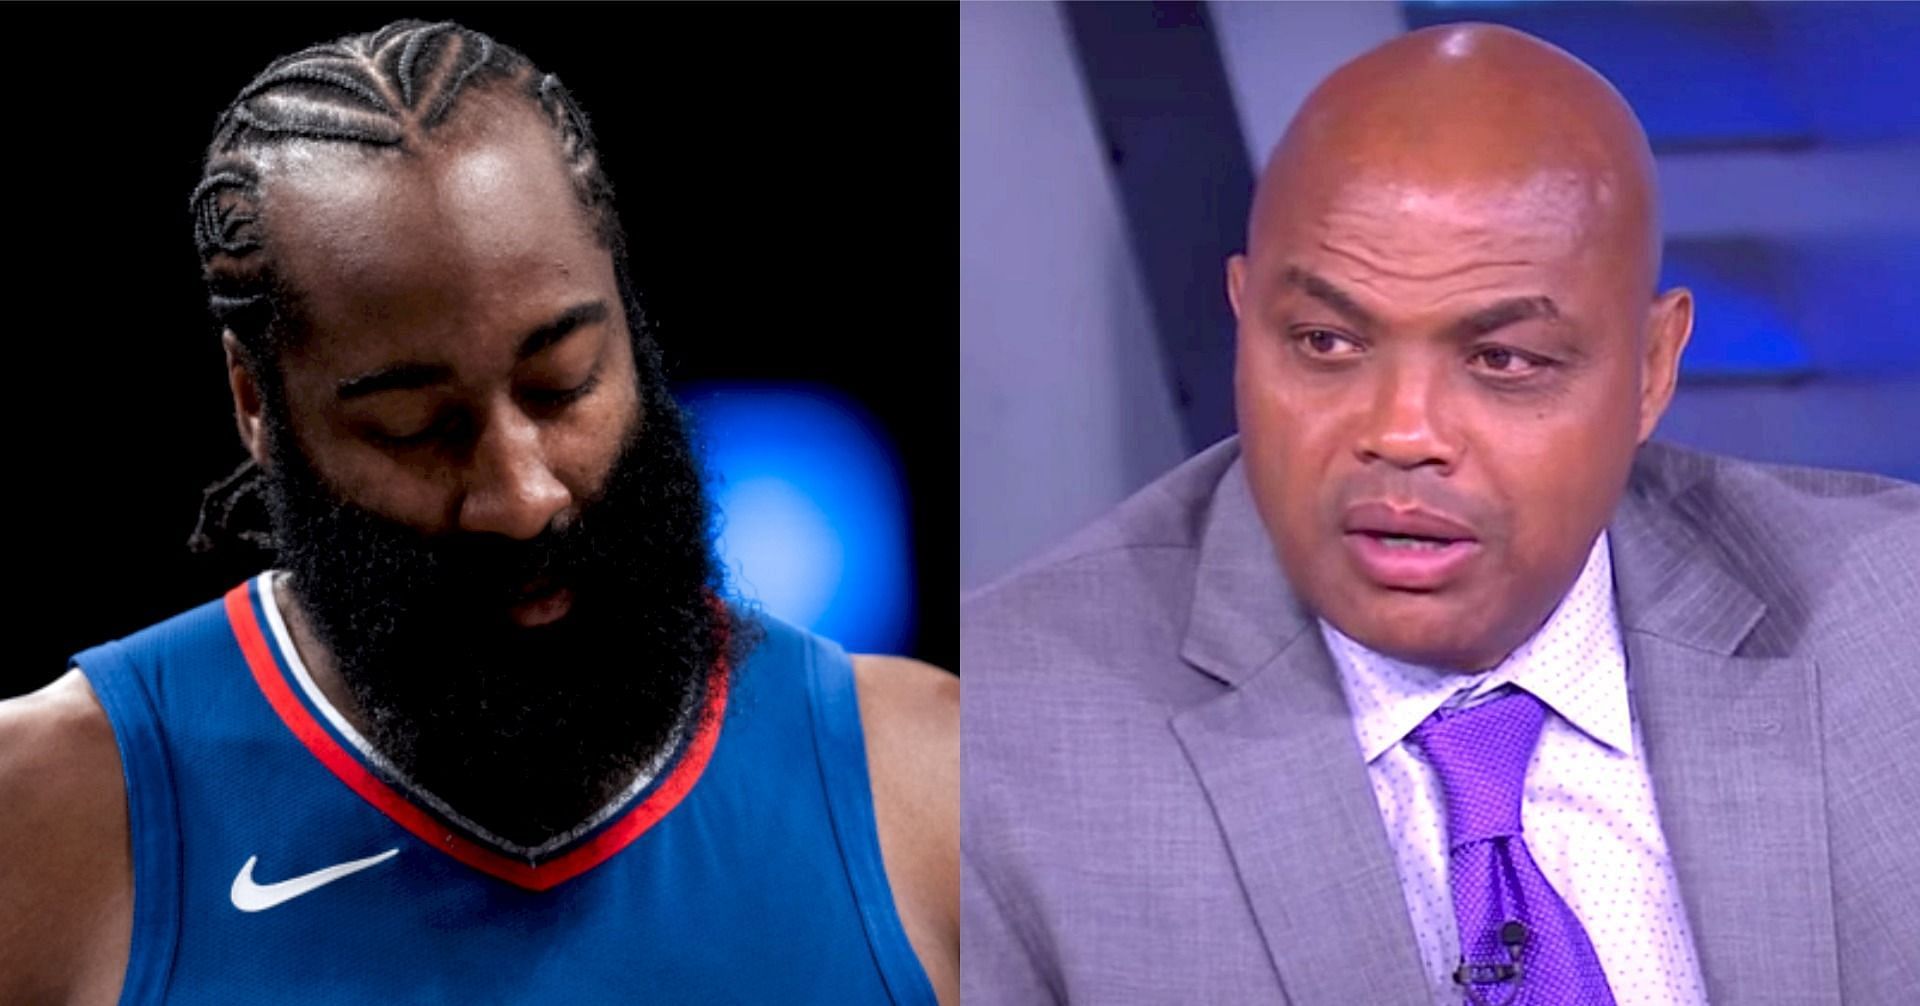 LA Clippers star guard James Harden and NBA legend-turned-TNT analyst Charles Barkley